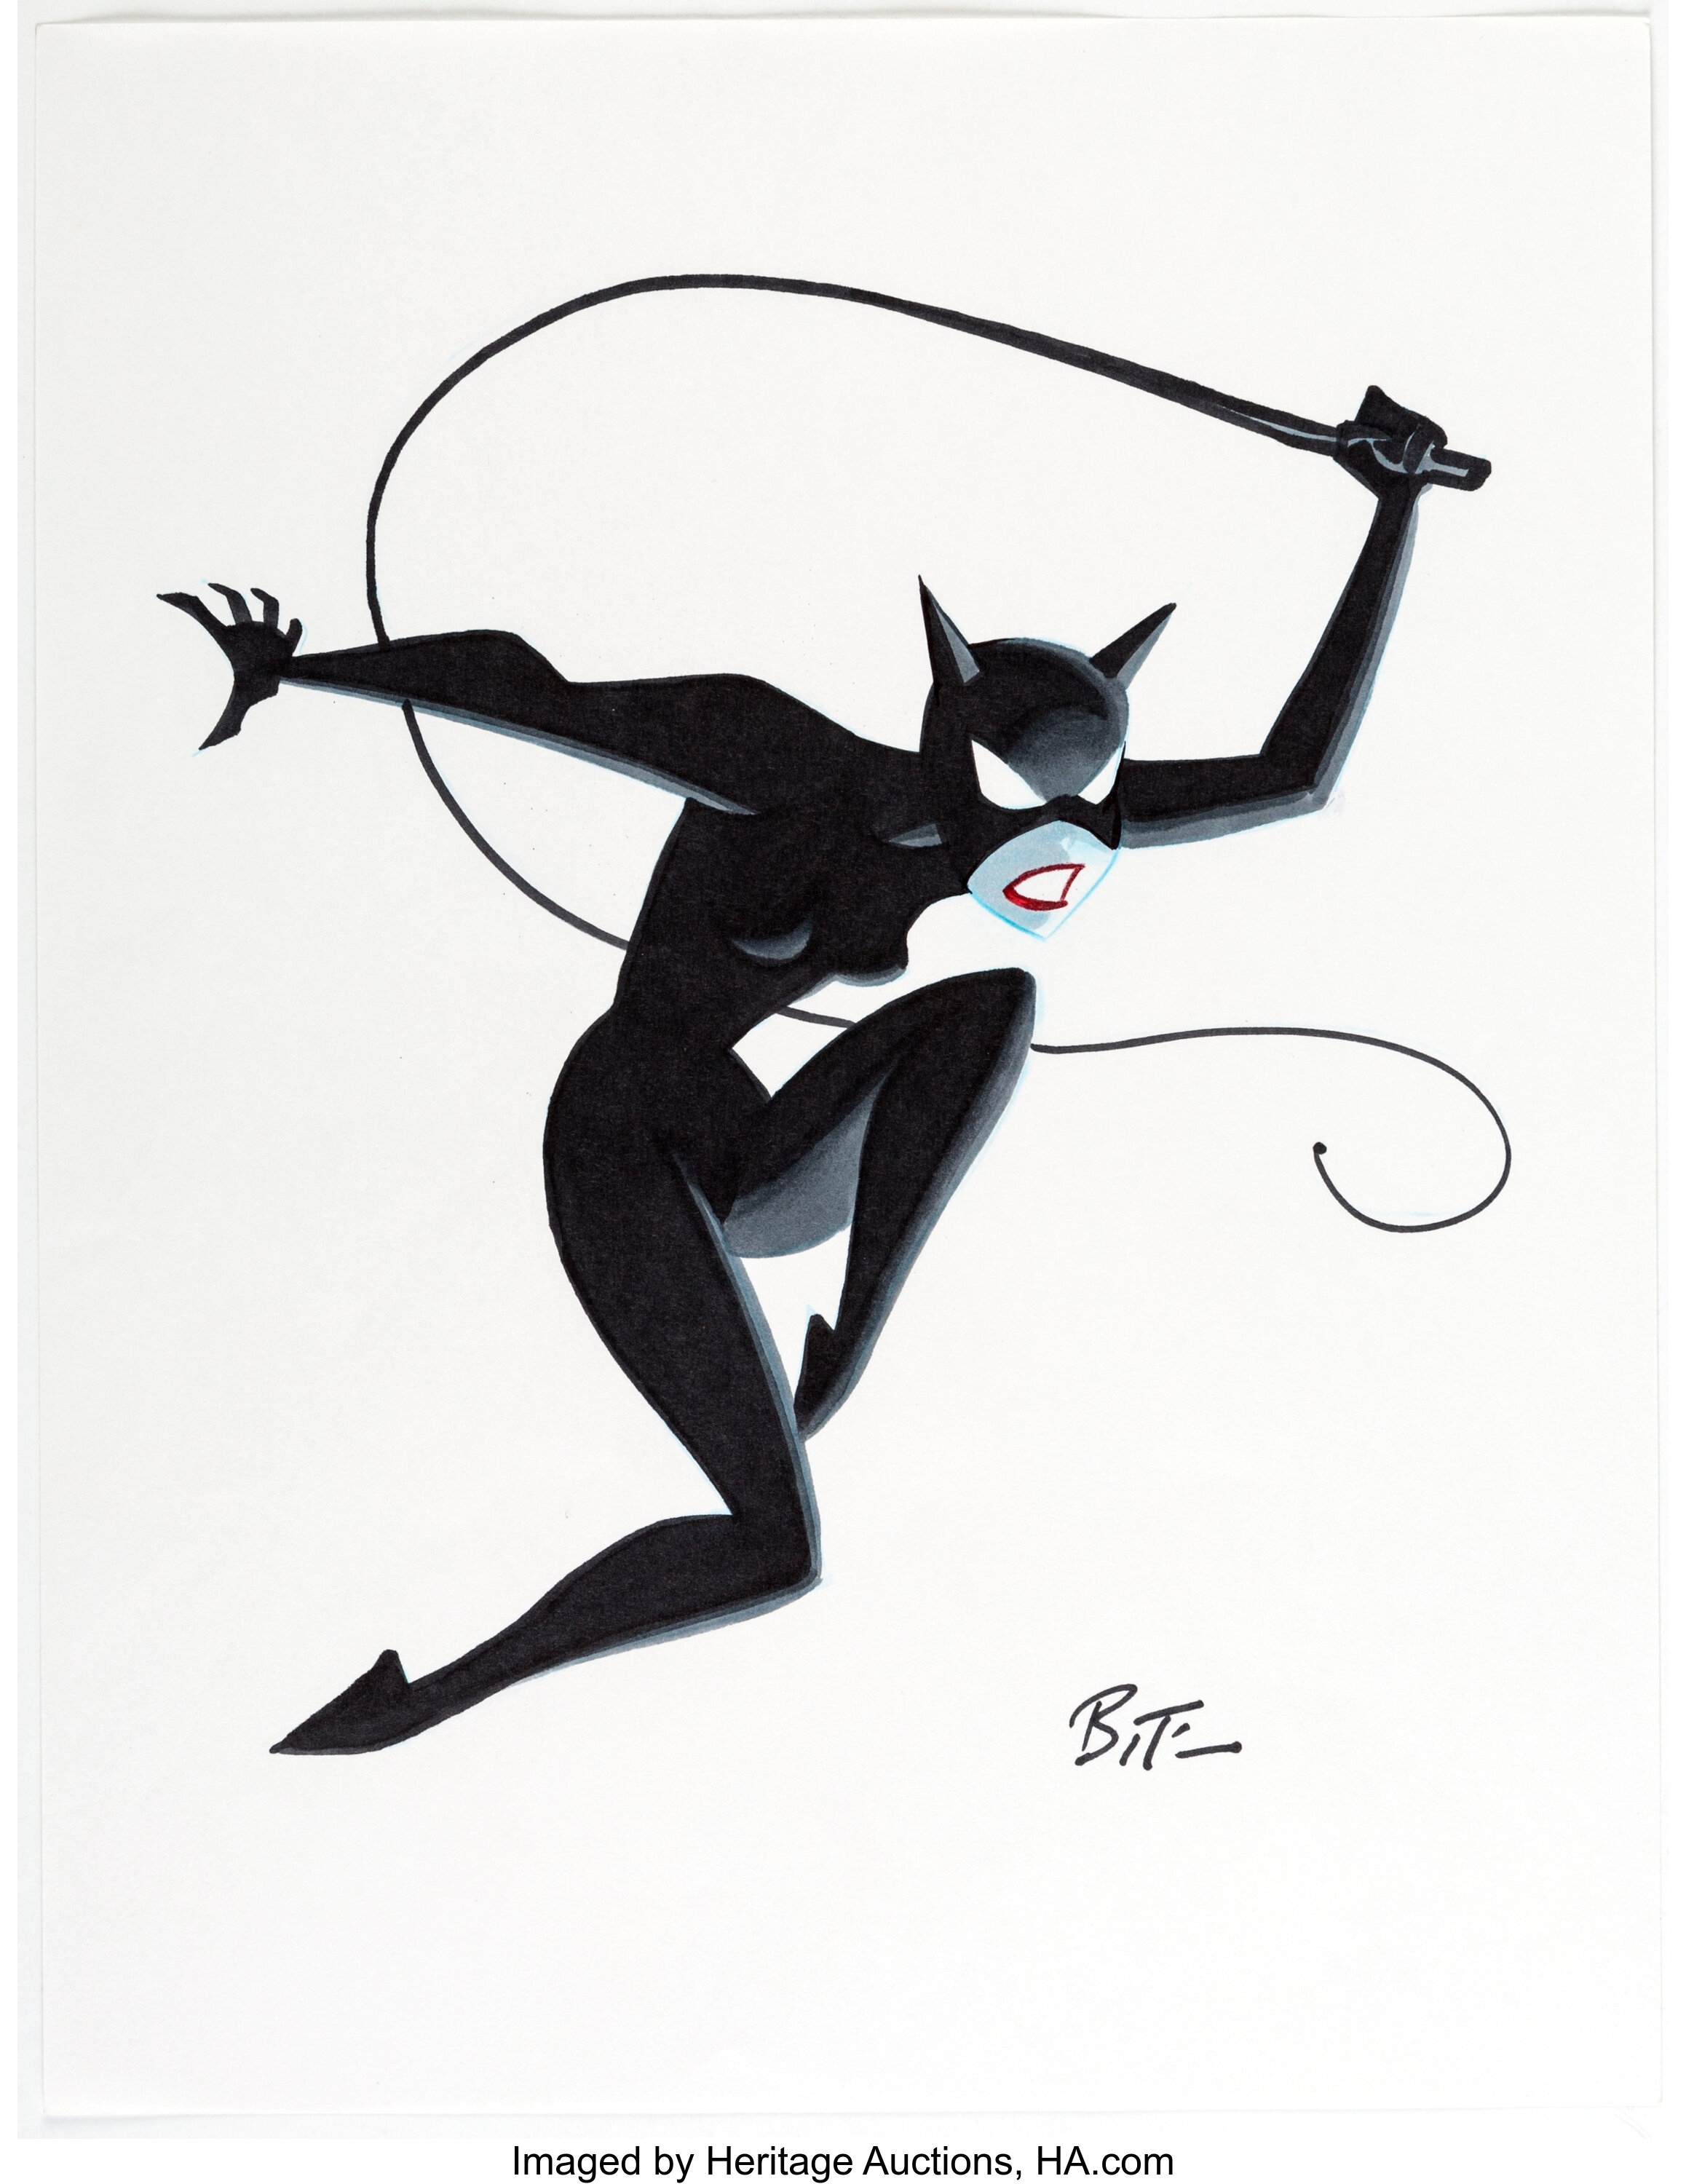 Batman the Animated Series Catwoman Illustration by Bruce Timm | Lot #13950  | Heritage Auctions